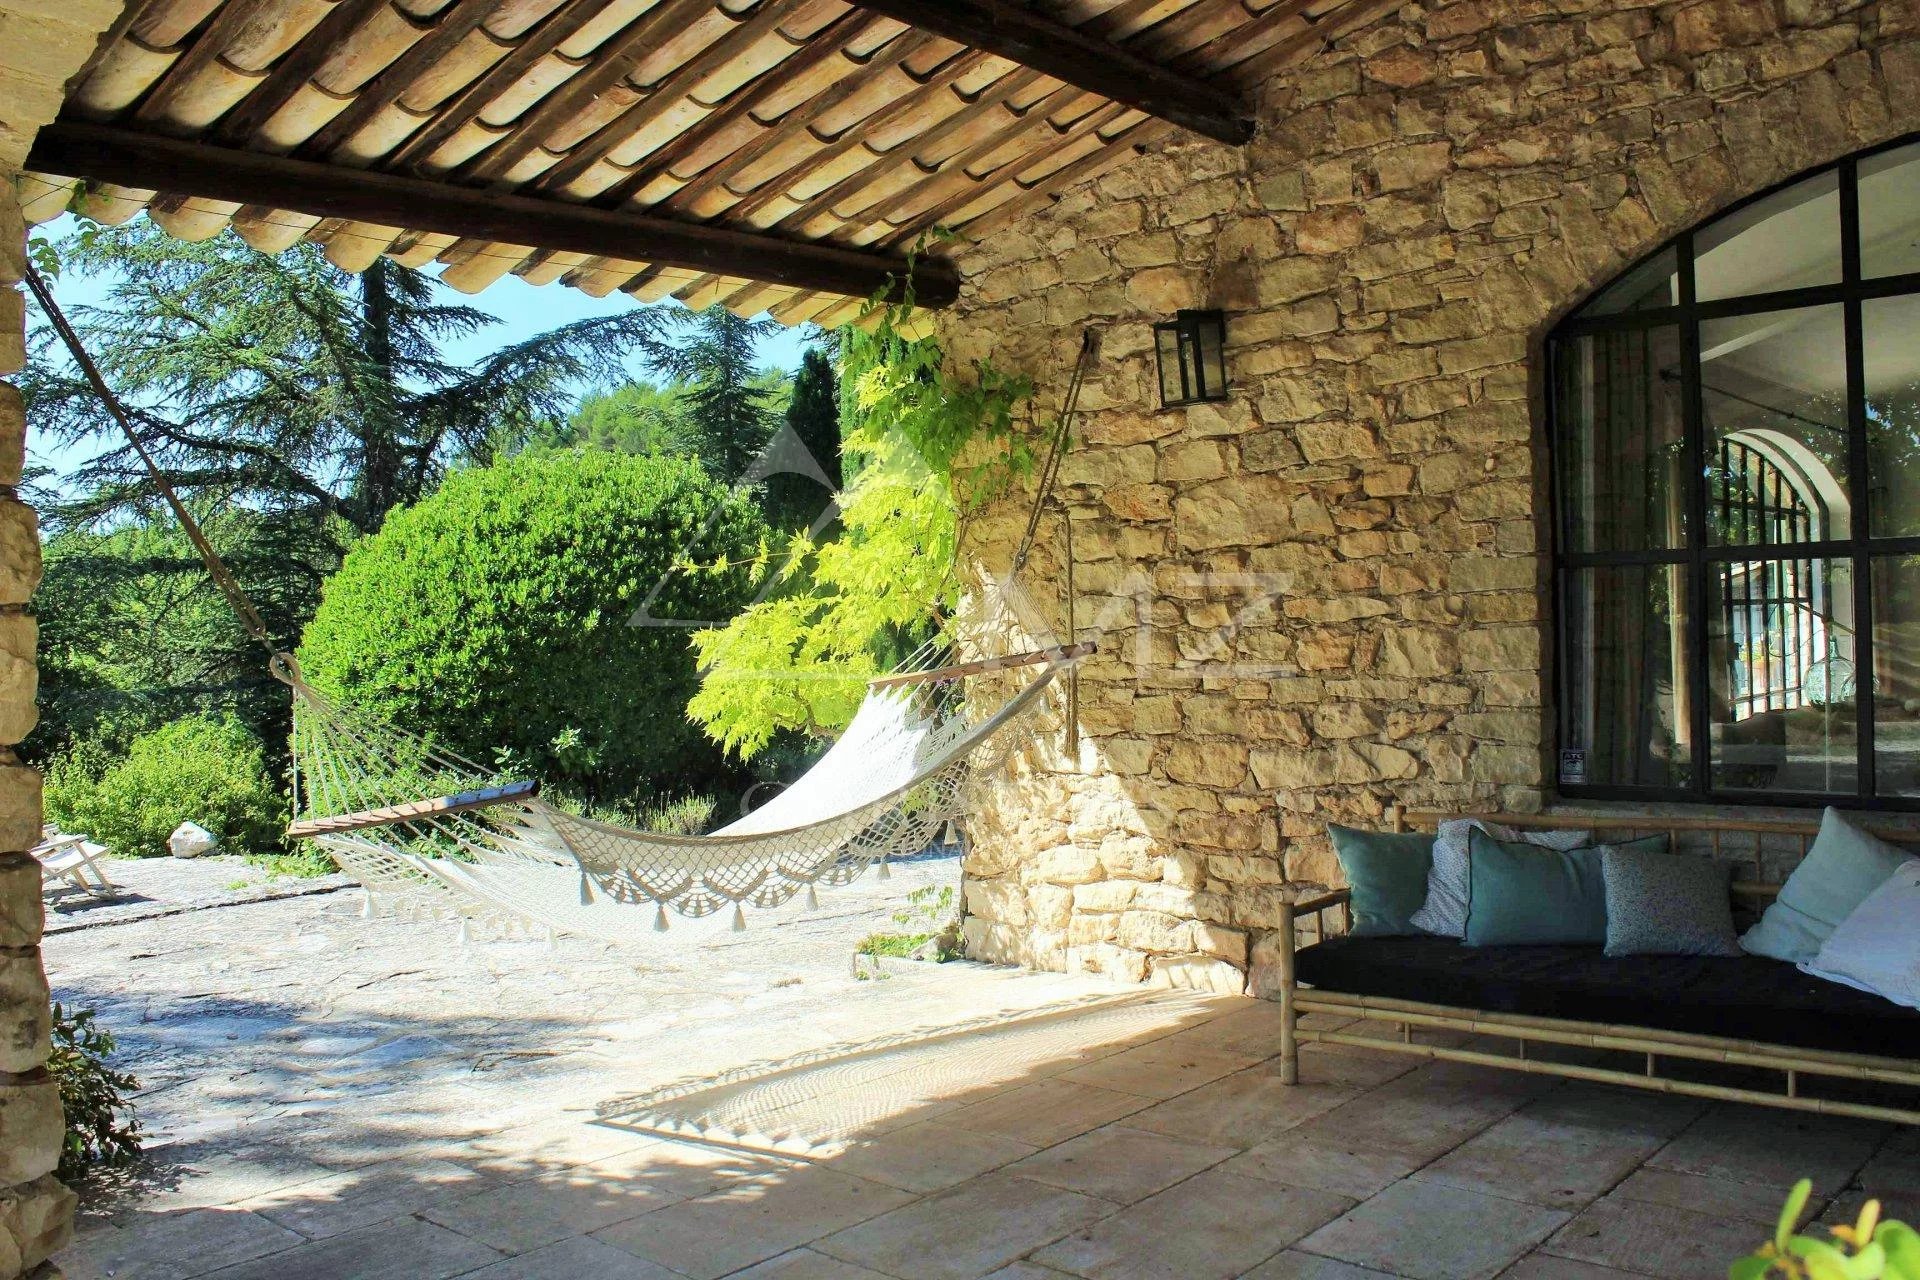 Close to Gordes - Beautiful holiday house